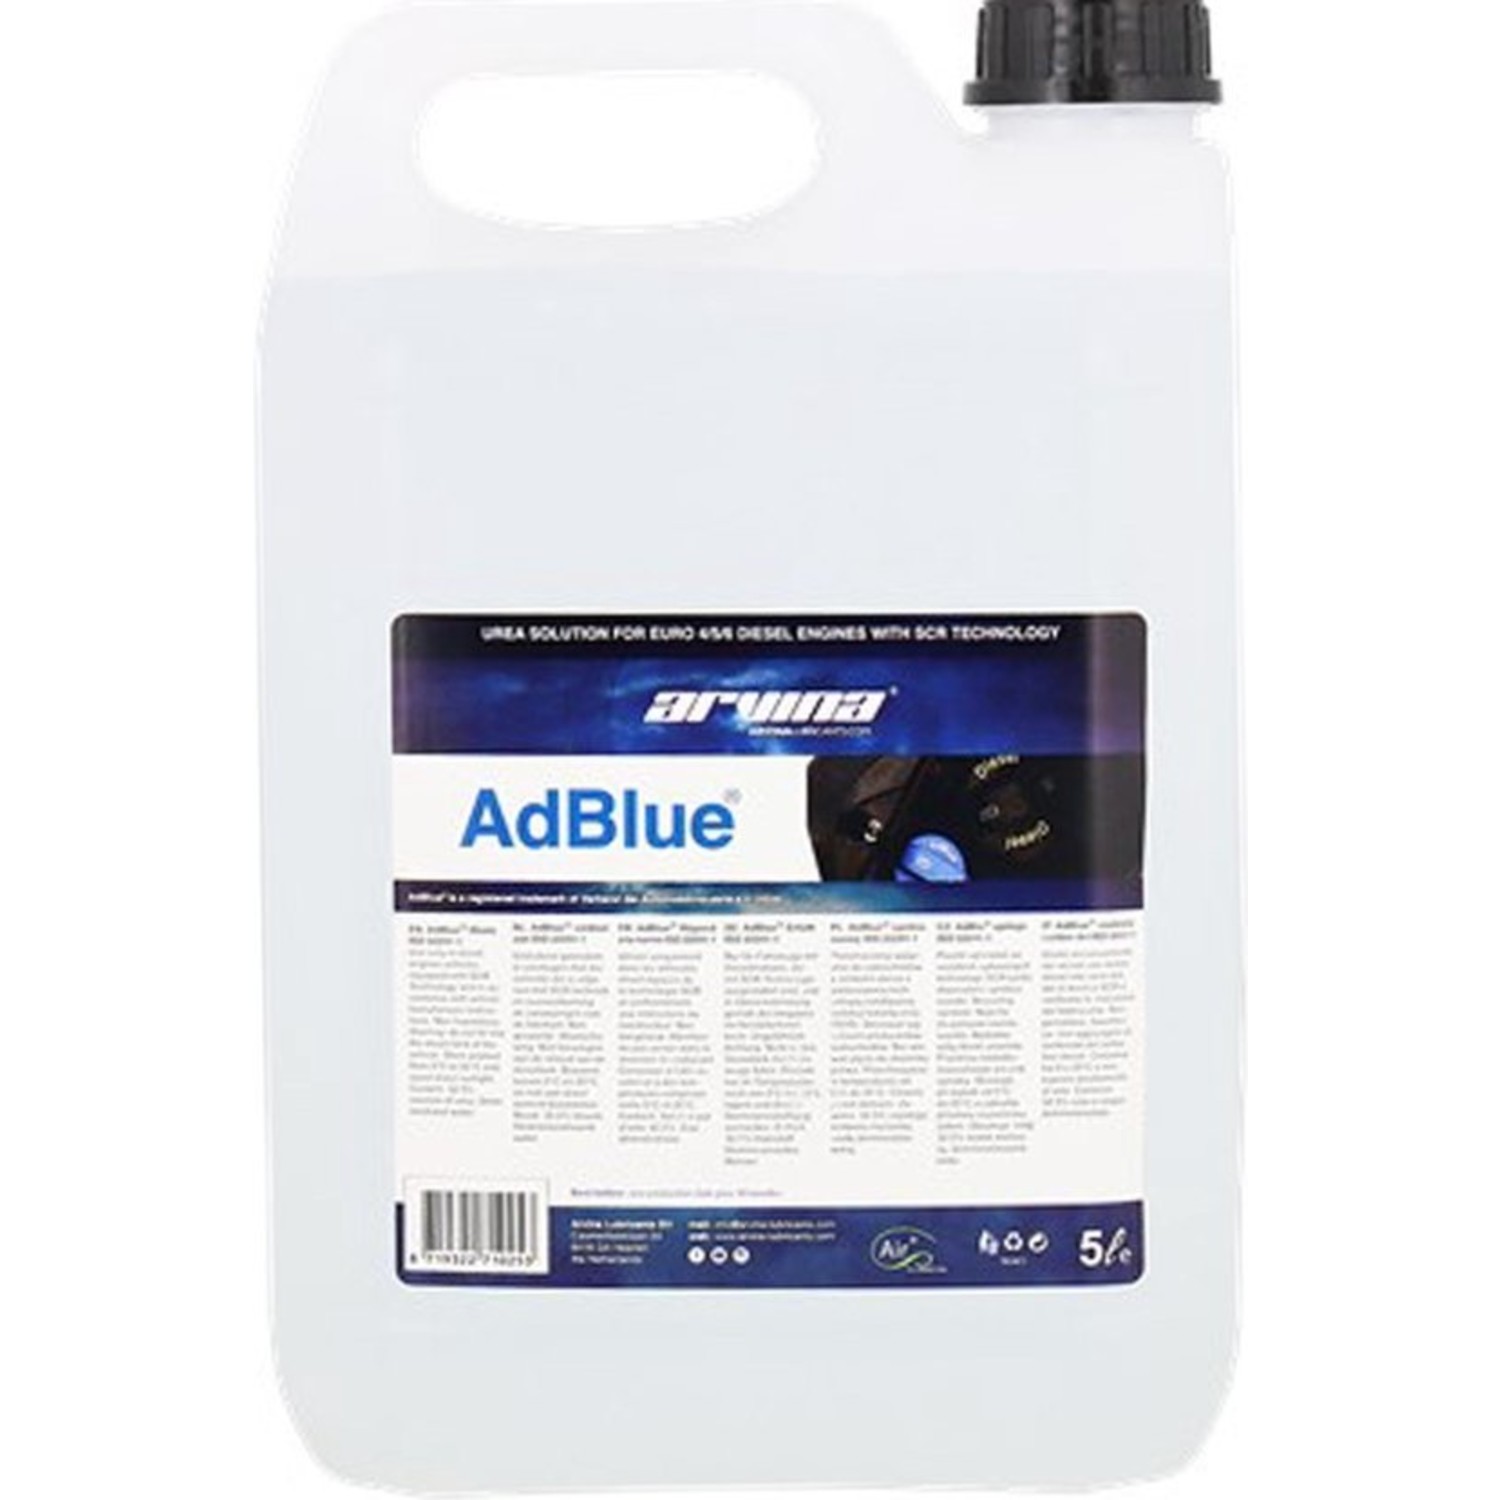 Cheap AdBlue 5 Liter with handy pouring spout 